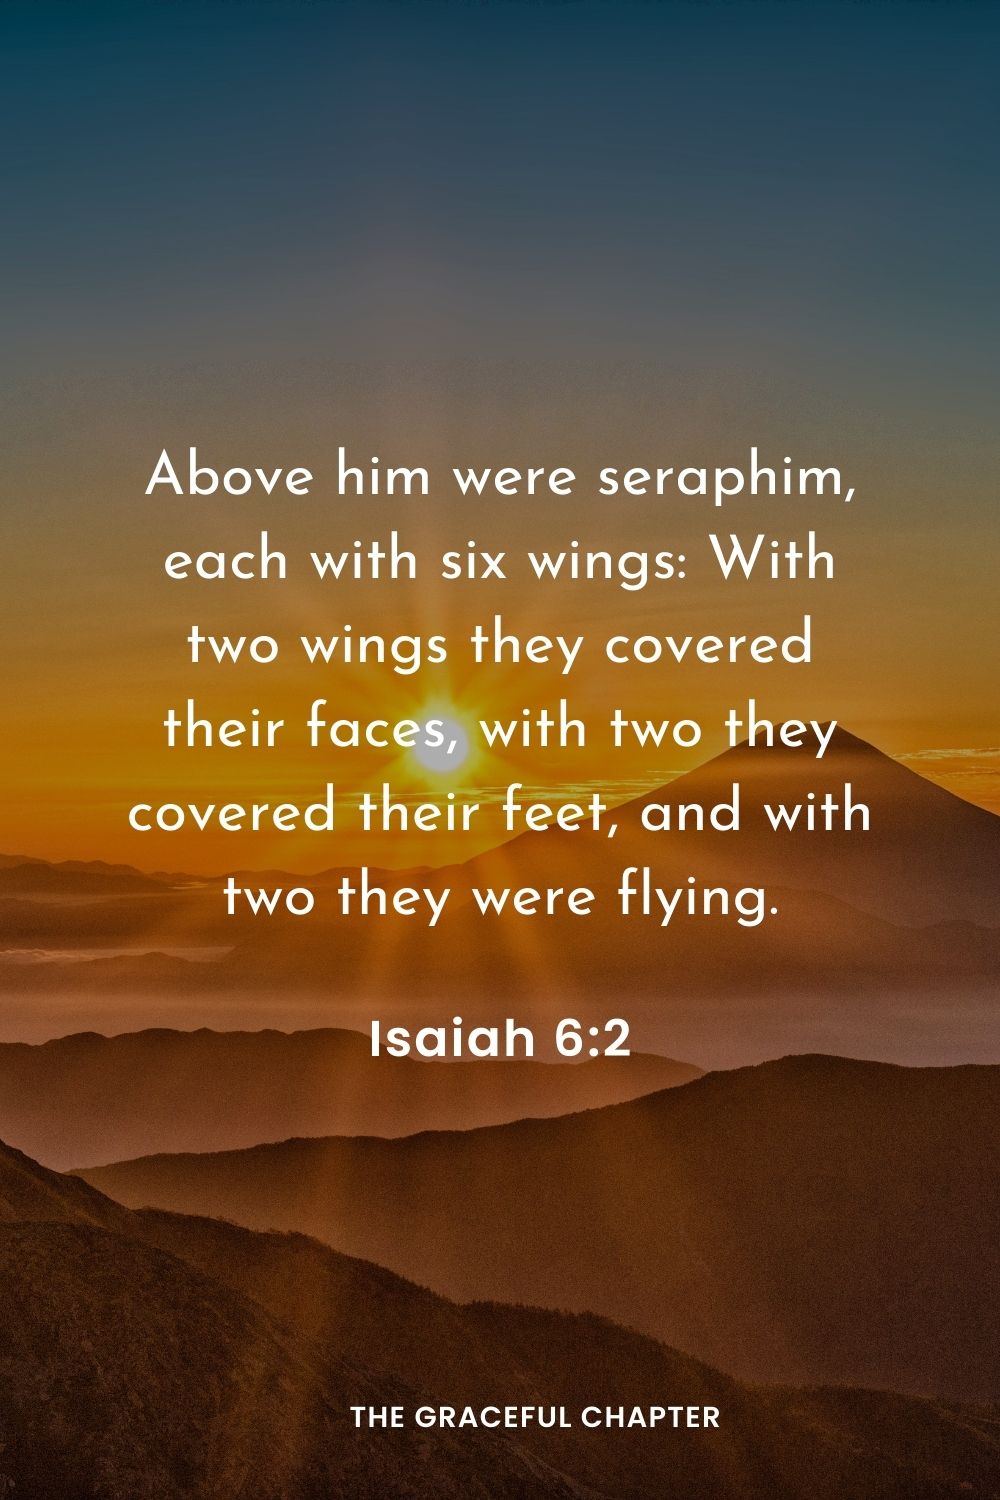 Above him were seraphim, each with six wings: With two wings they covered their faces, with two they covered their feet, and with two they were flying.